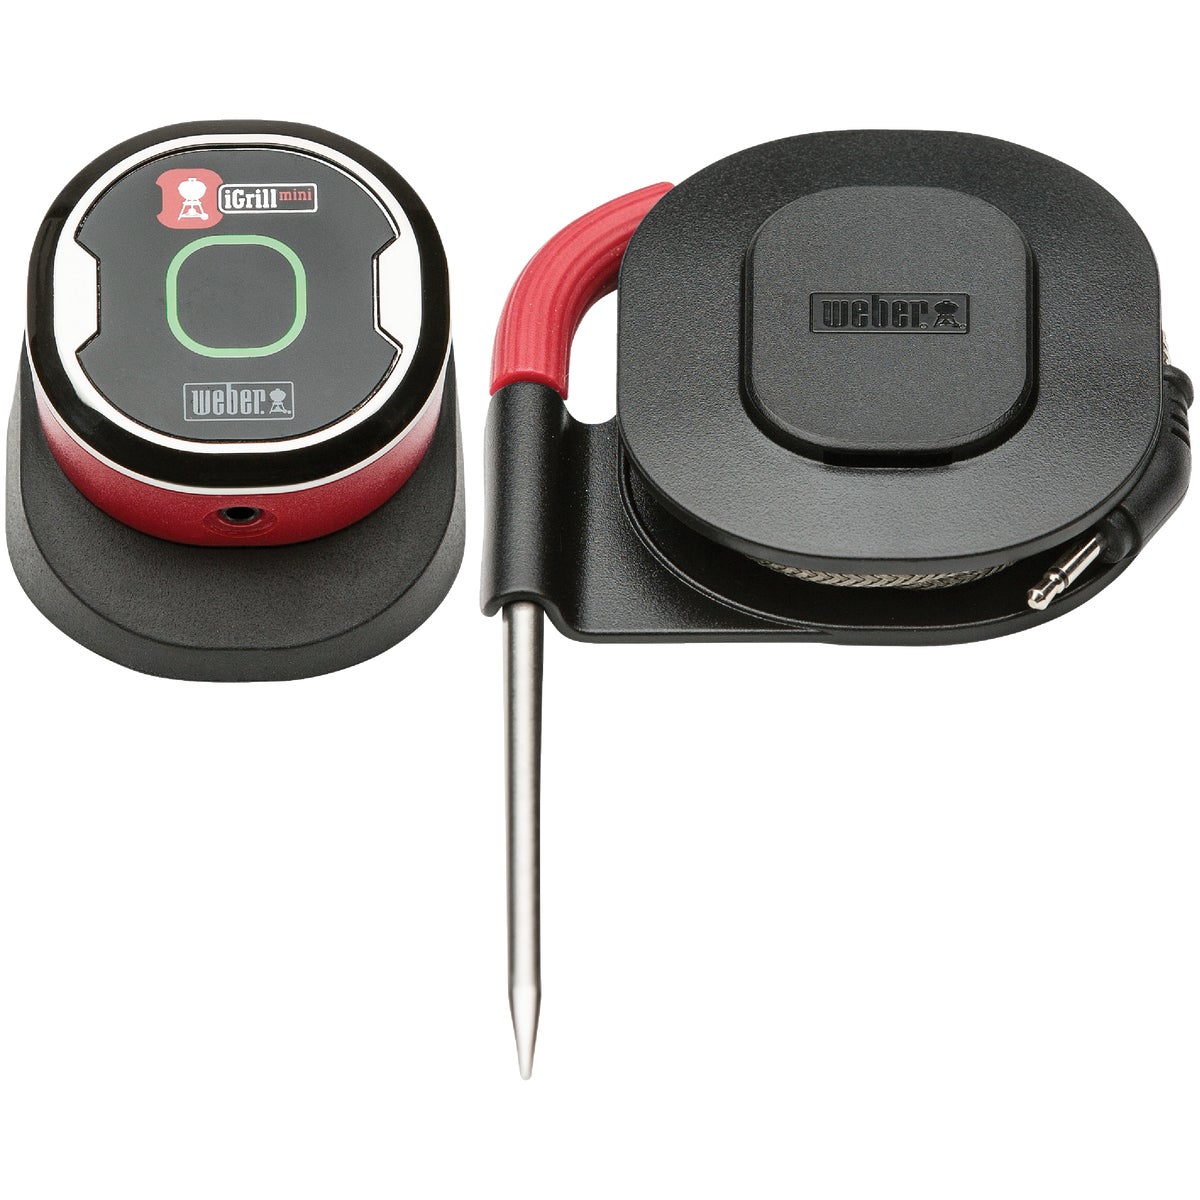 Item 601919, App-connected thermometer that monitors the progress of grilling from 